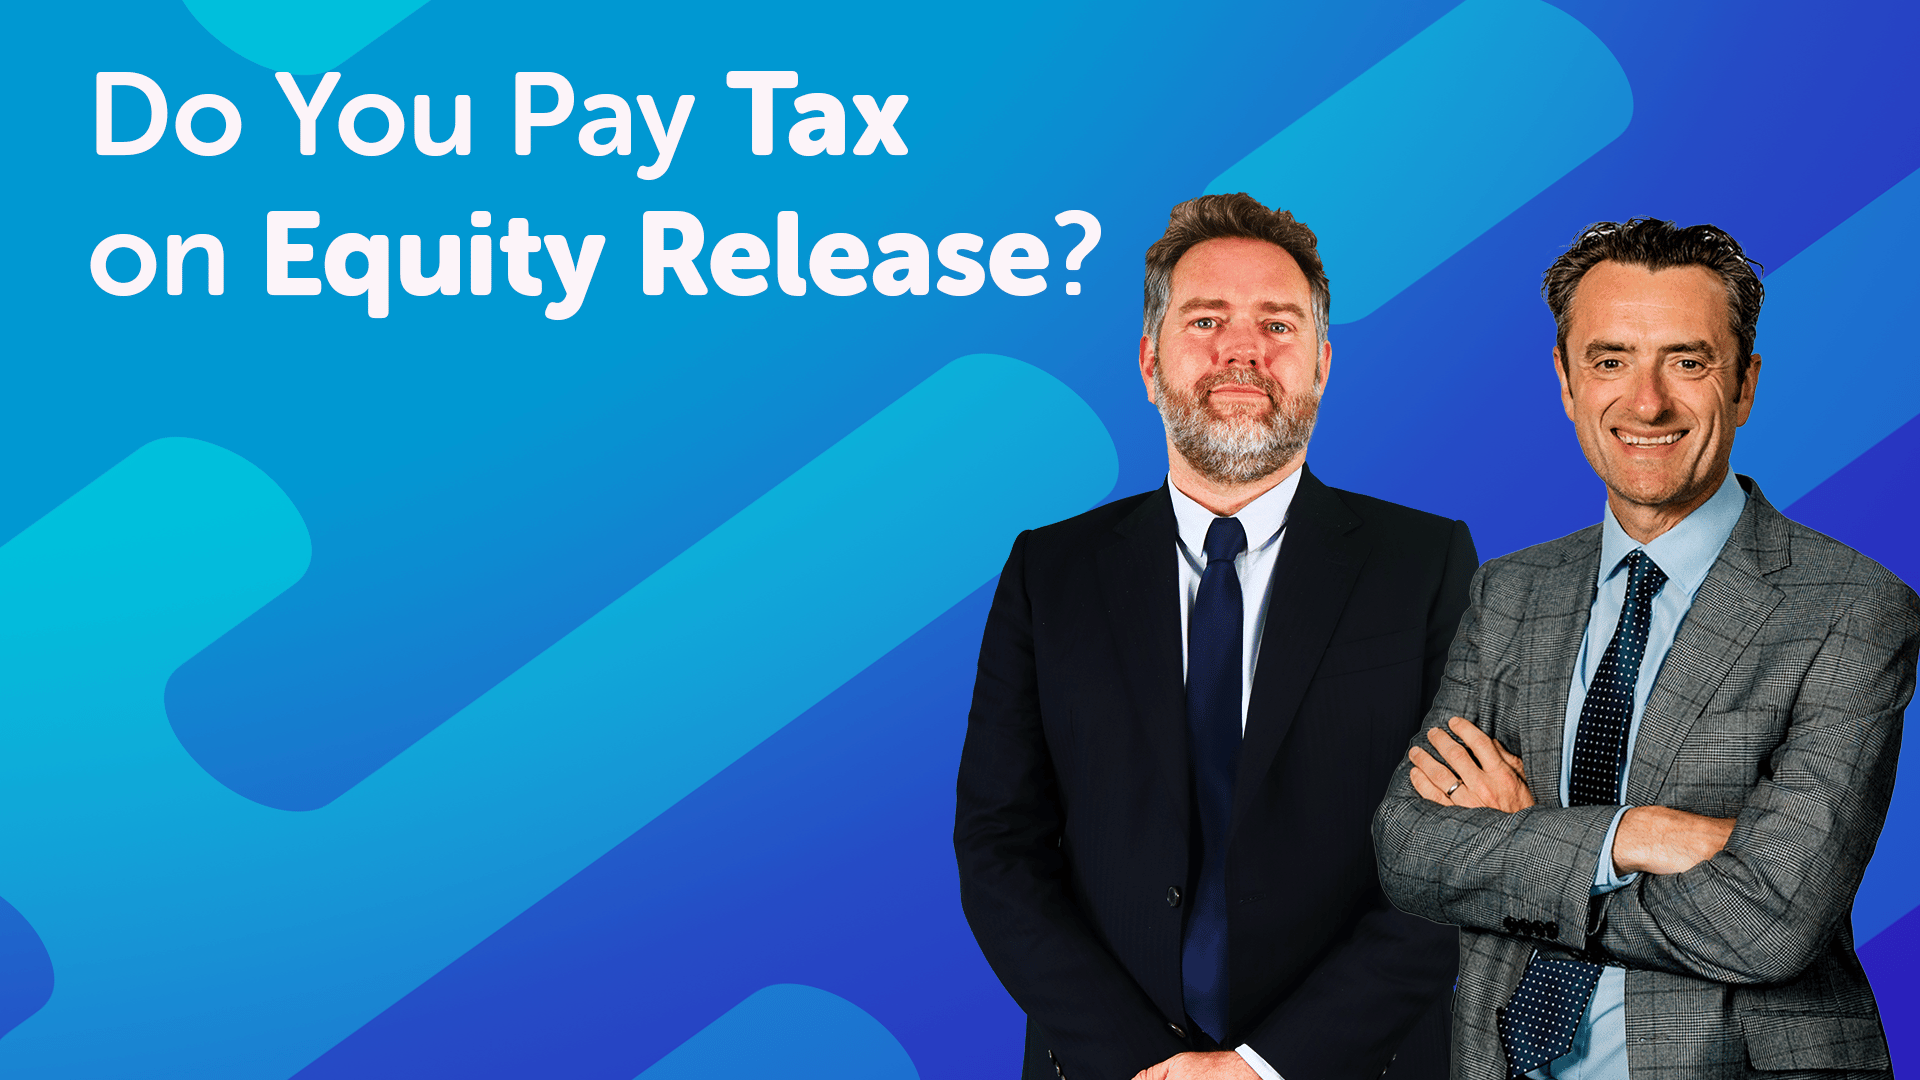 Tax on Equity Release